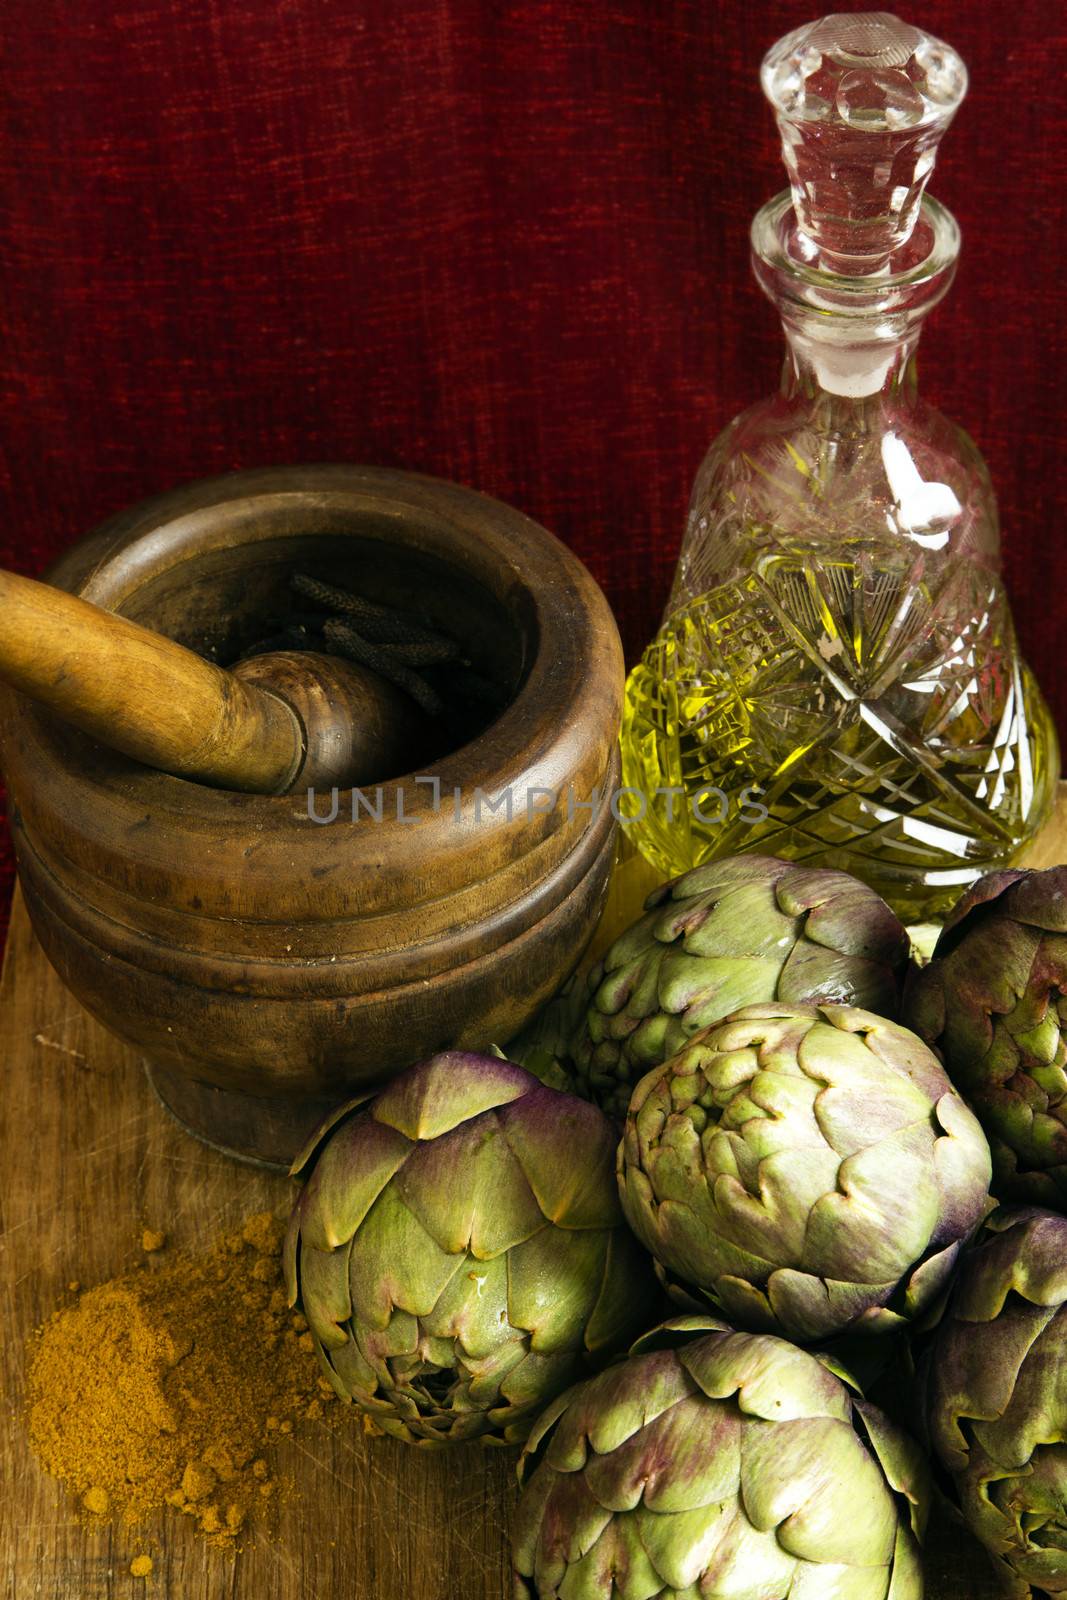 Mediterranean food: artichokes and spices such as curry and long black pepper in a mortar and pestle and olive oil bottle on dark red background.